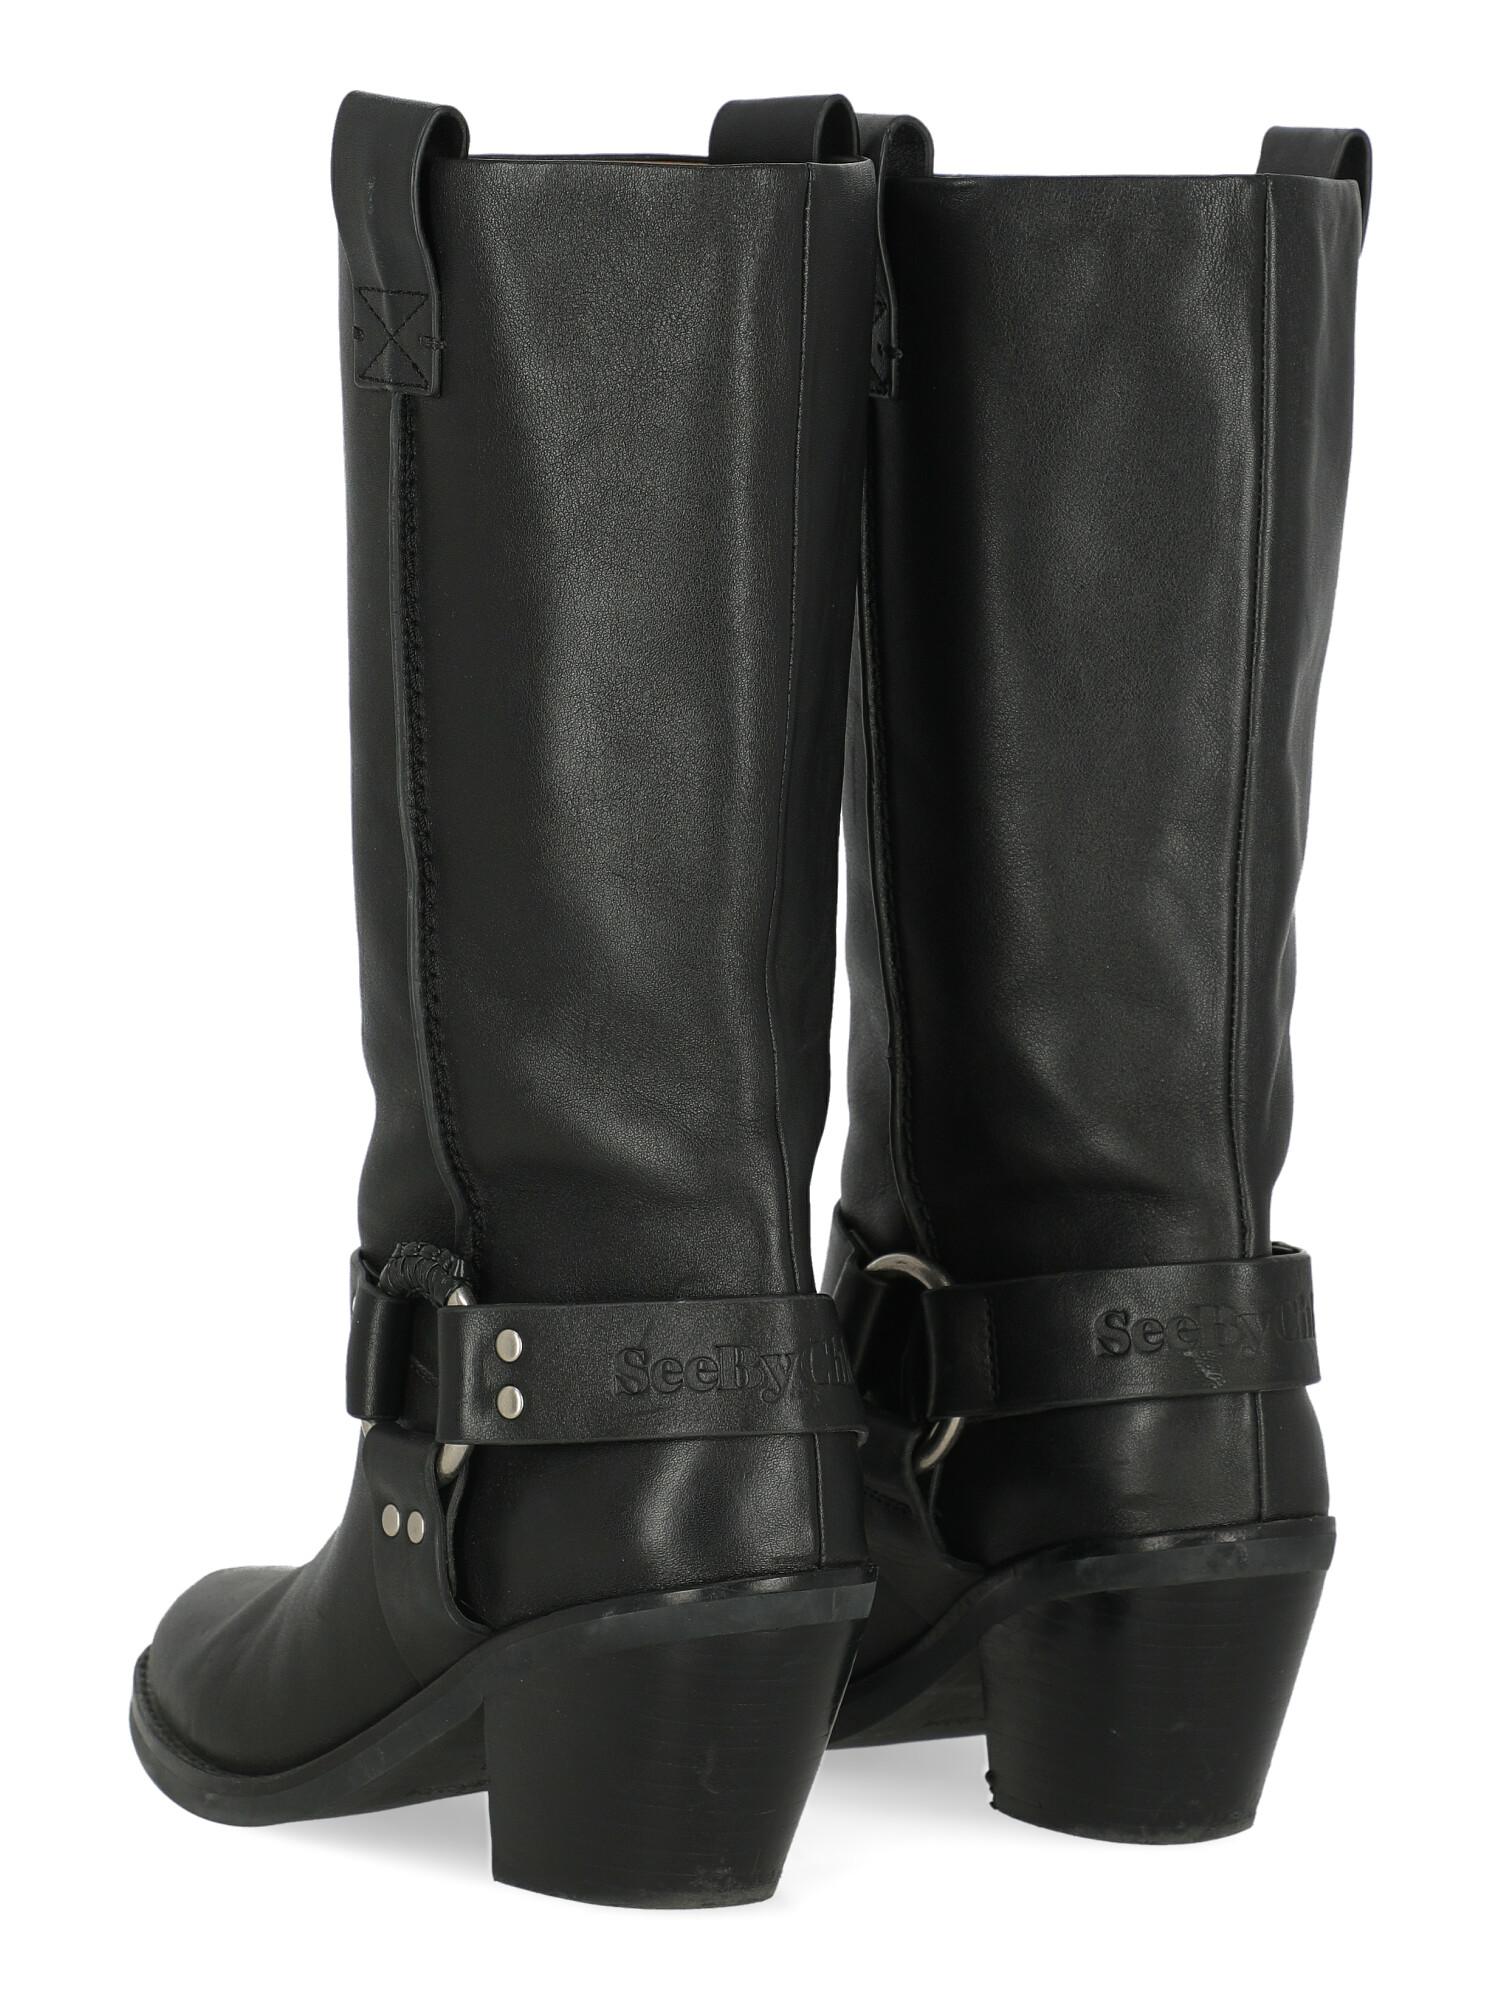 See By ChloÃ© Women Boots Black Leather EU 39 In Fair Condition For Sale In Milan, IT